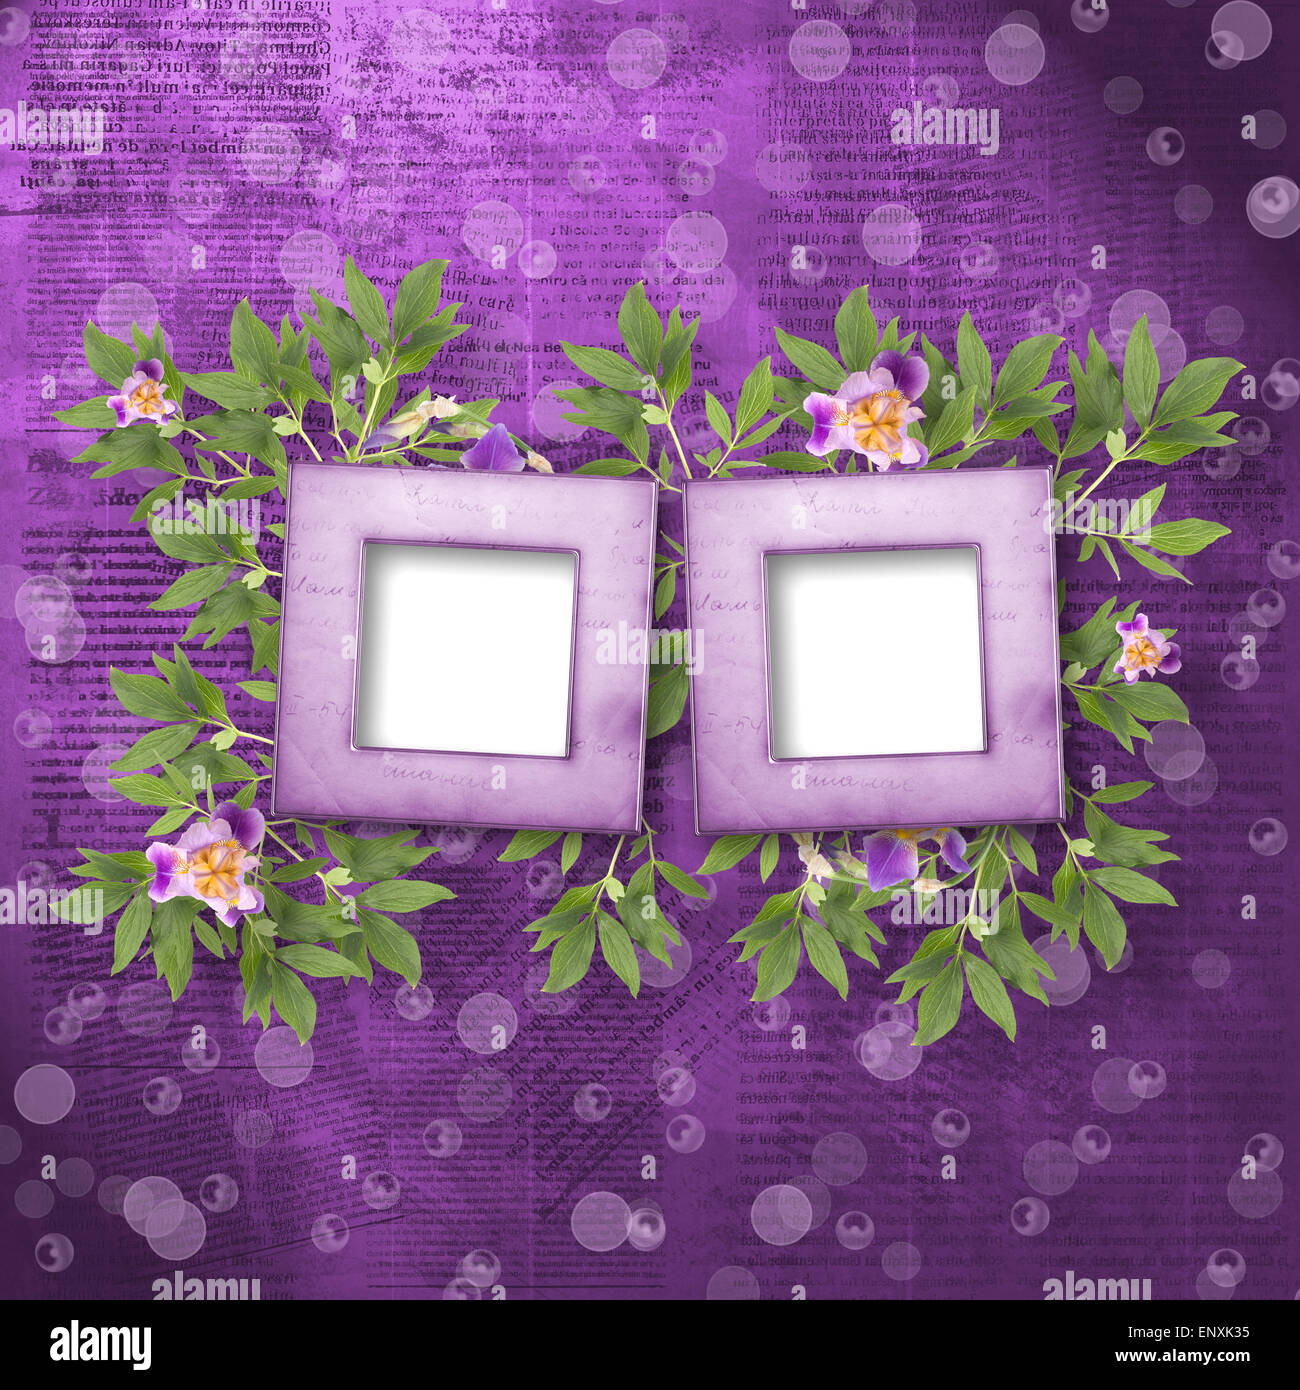 Old newspaper background with frame and bunch of flower Stock Photo